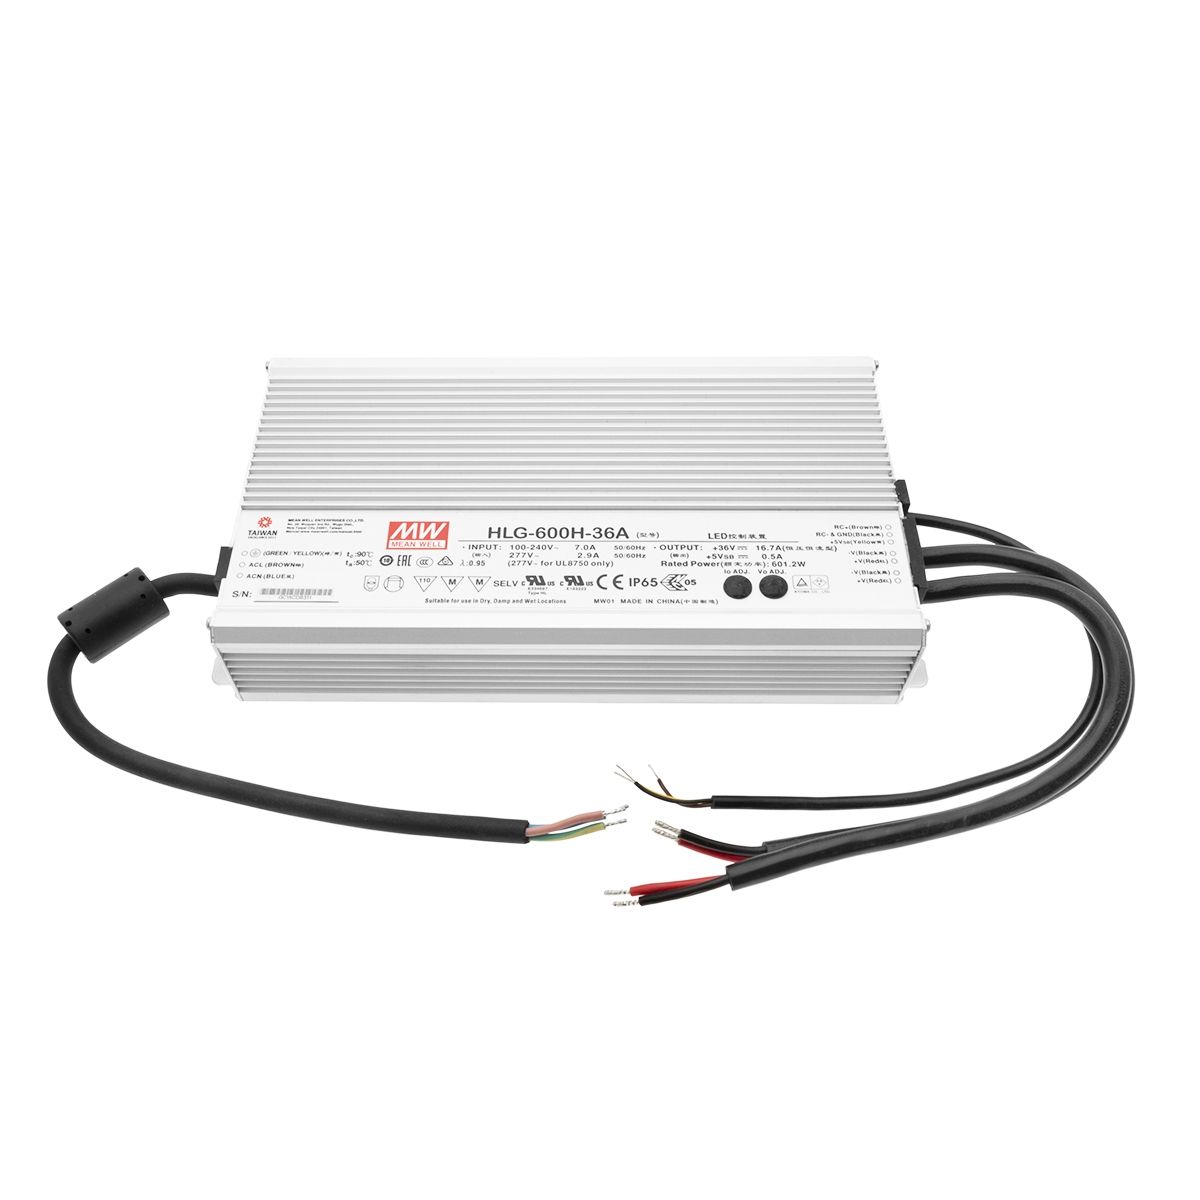 LED supply 600W, IP65 - powerful and reliable luminaire power supply Mean Well